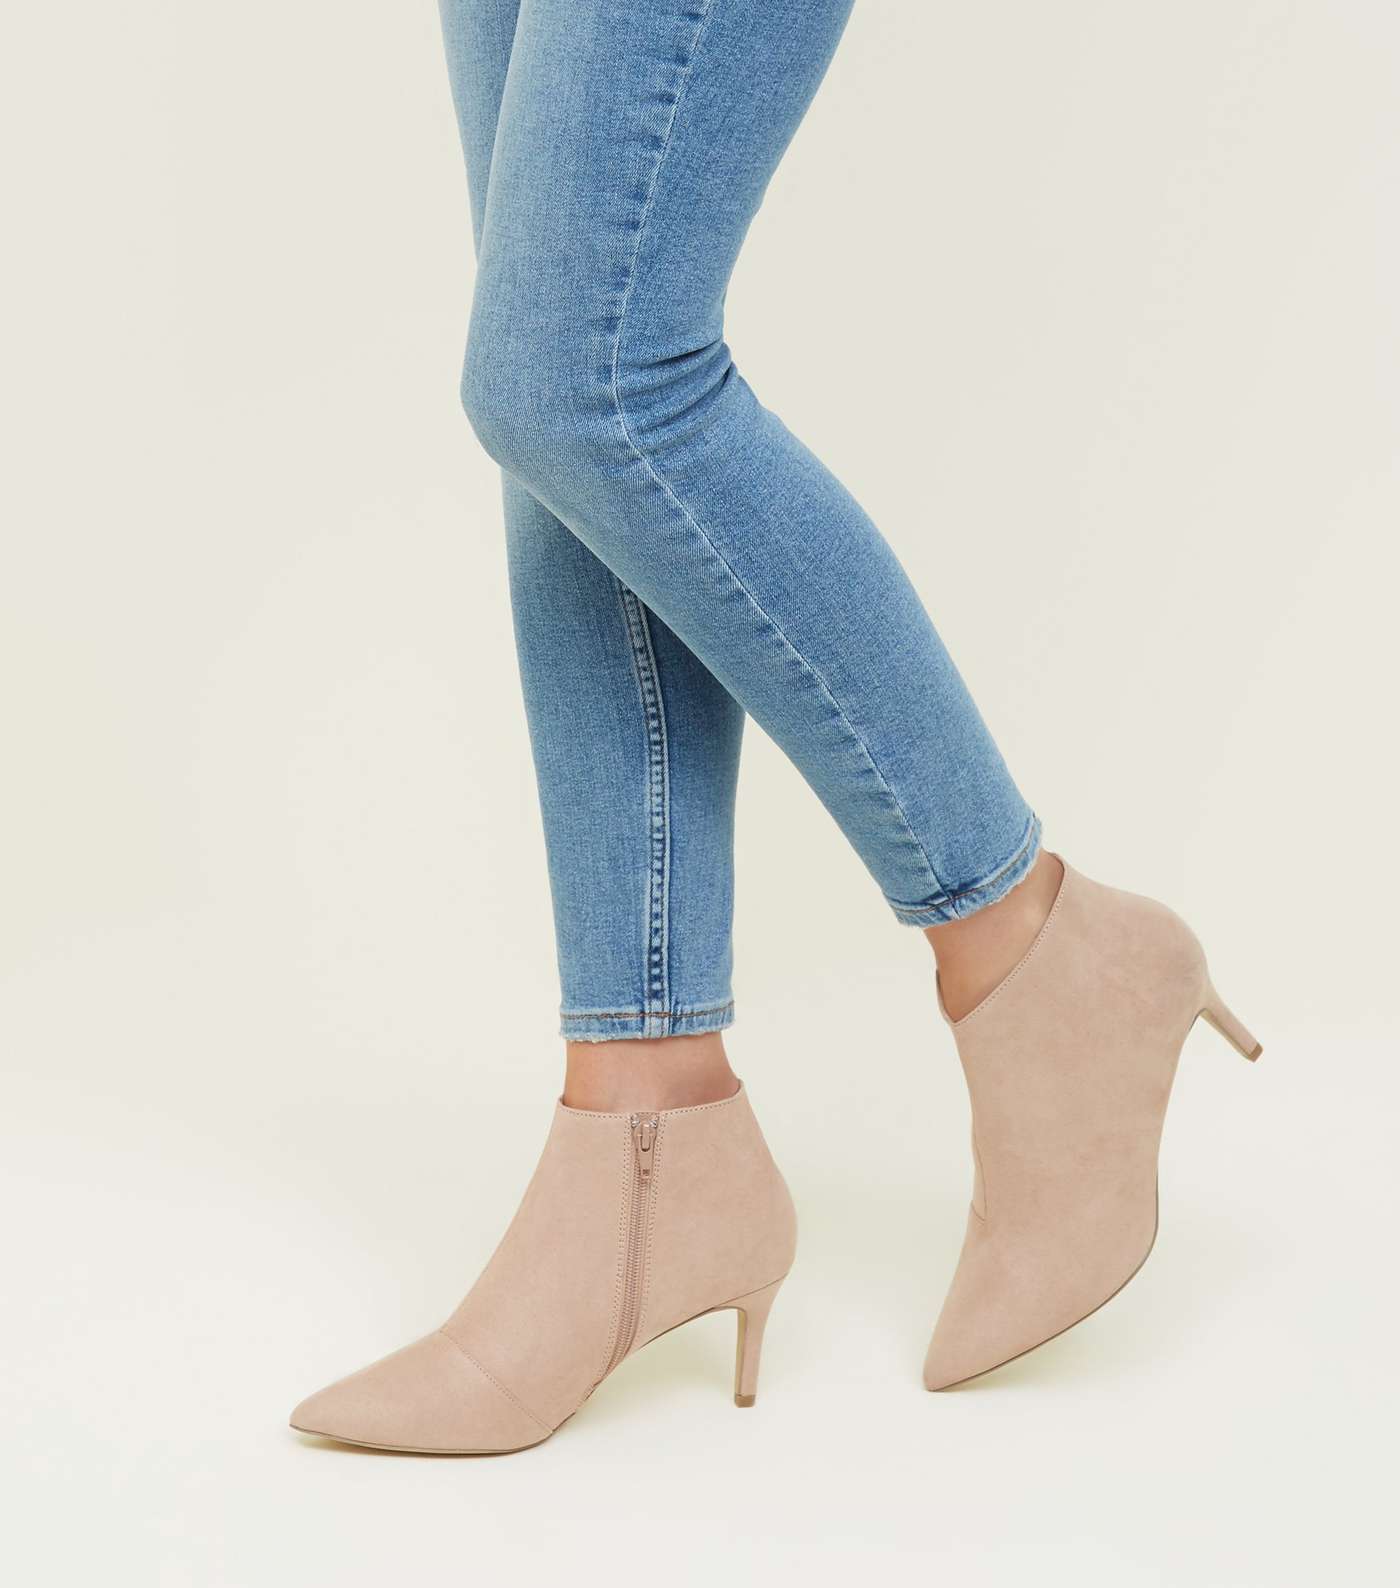 Wide Fit Nude Suedette Stiletto Heel Ankle Boots Image 2